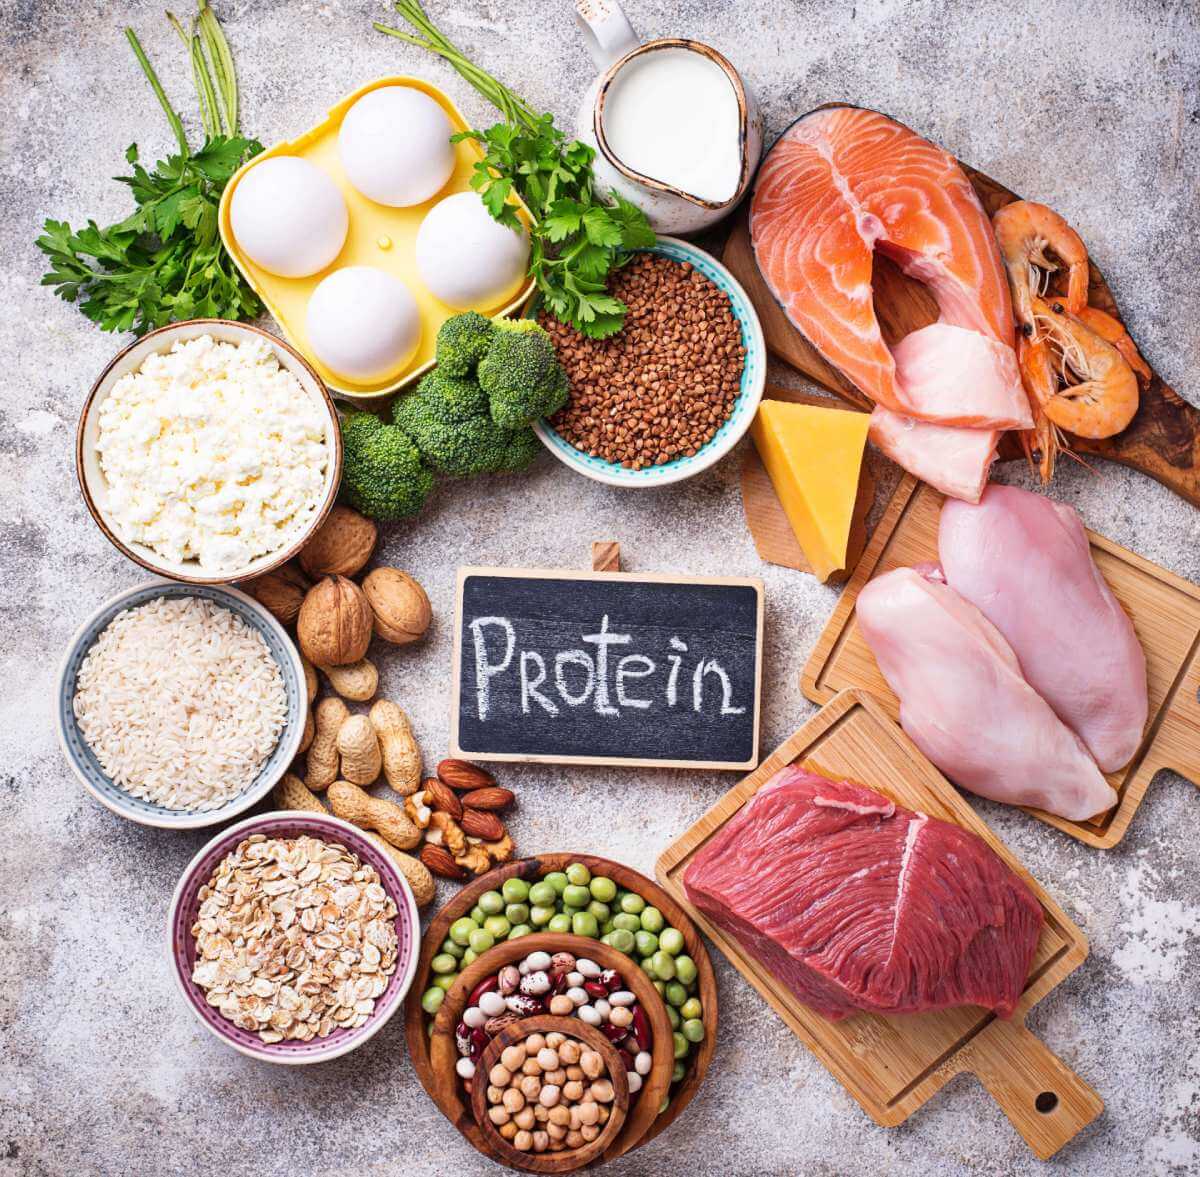 THE EFFECT OF PLANT PROTEIN AND ANIMAL PROTEIN ON HEART HEALTH